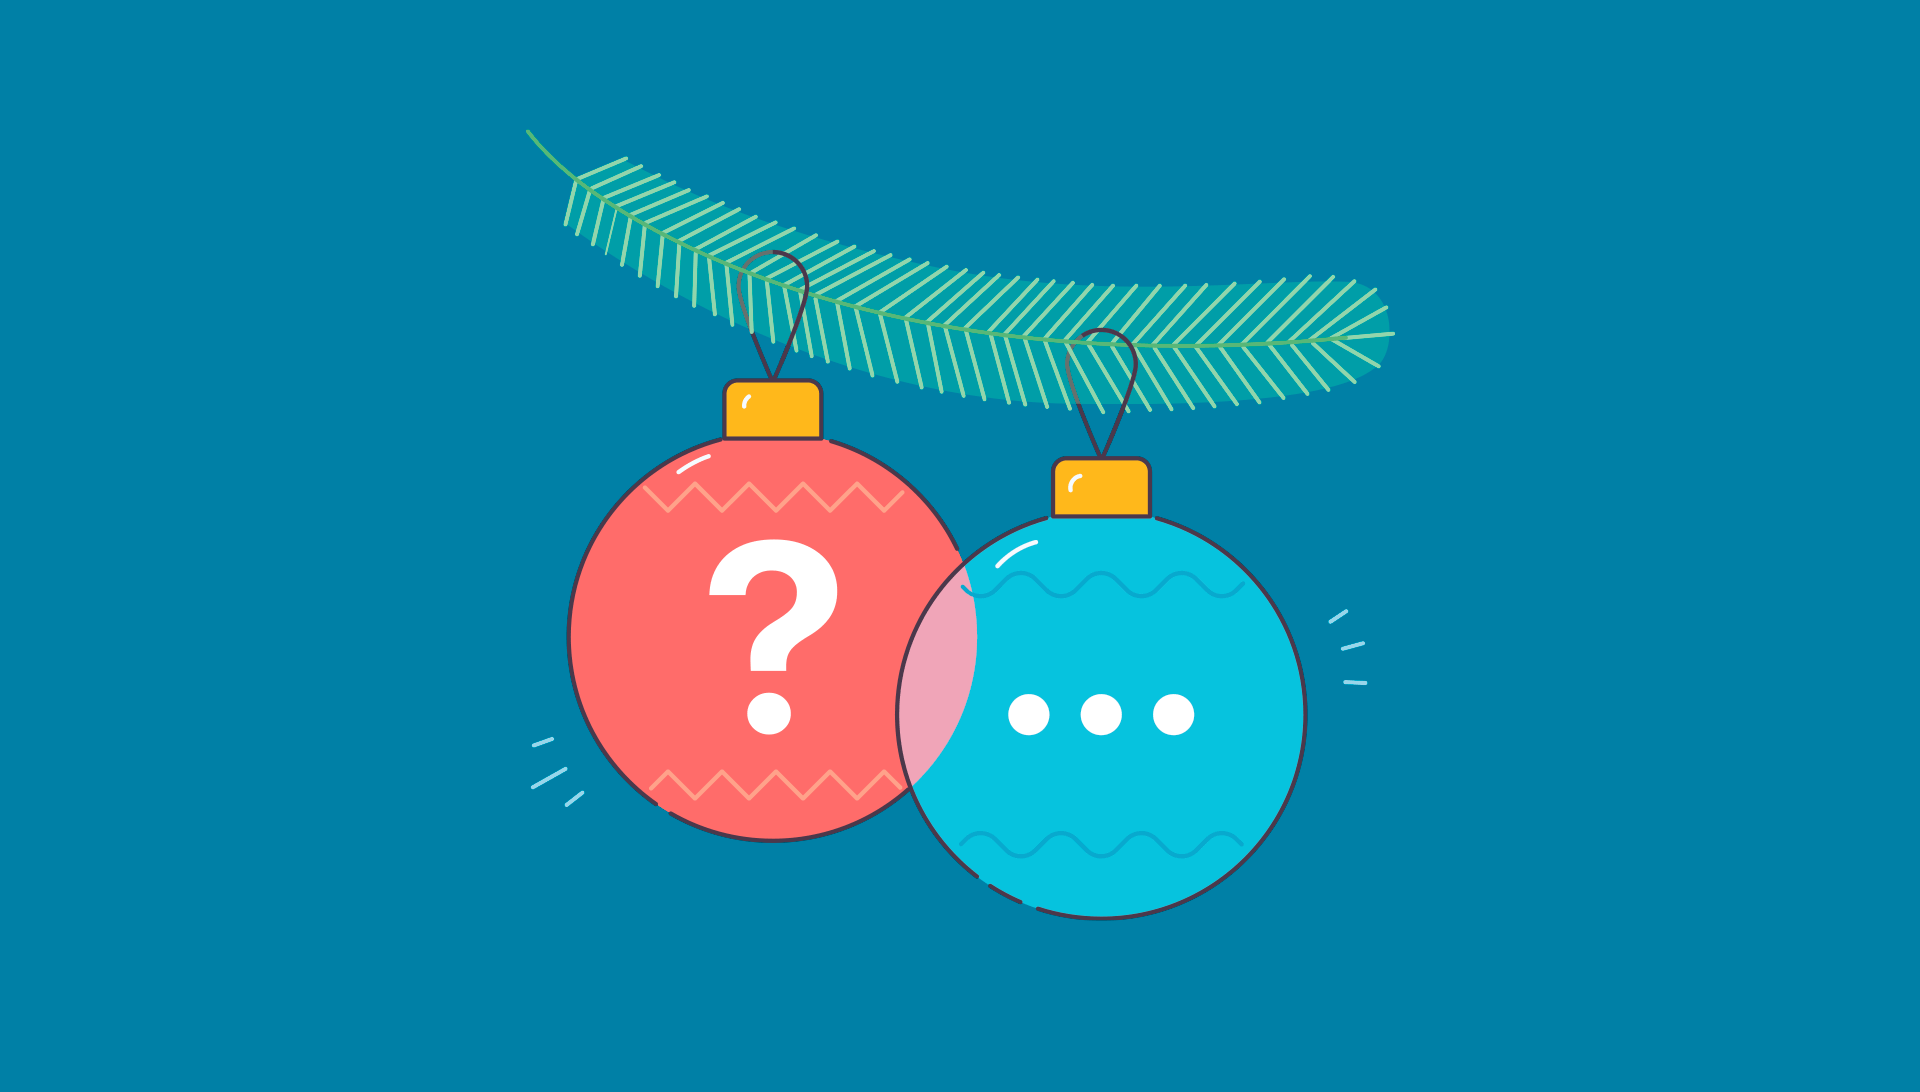 An illustration of red and blue Christmas ornaments hanging from a tree leaf with a question mark and an ellipse inside them